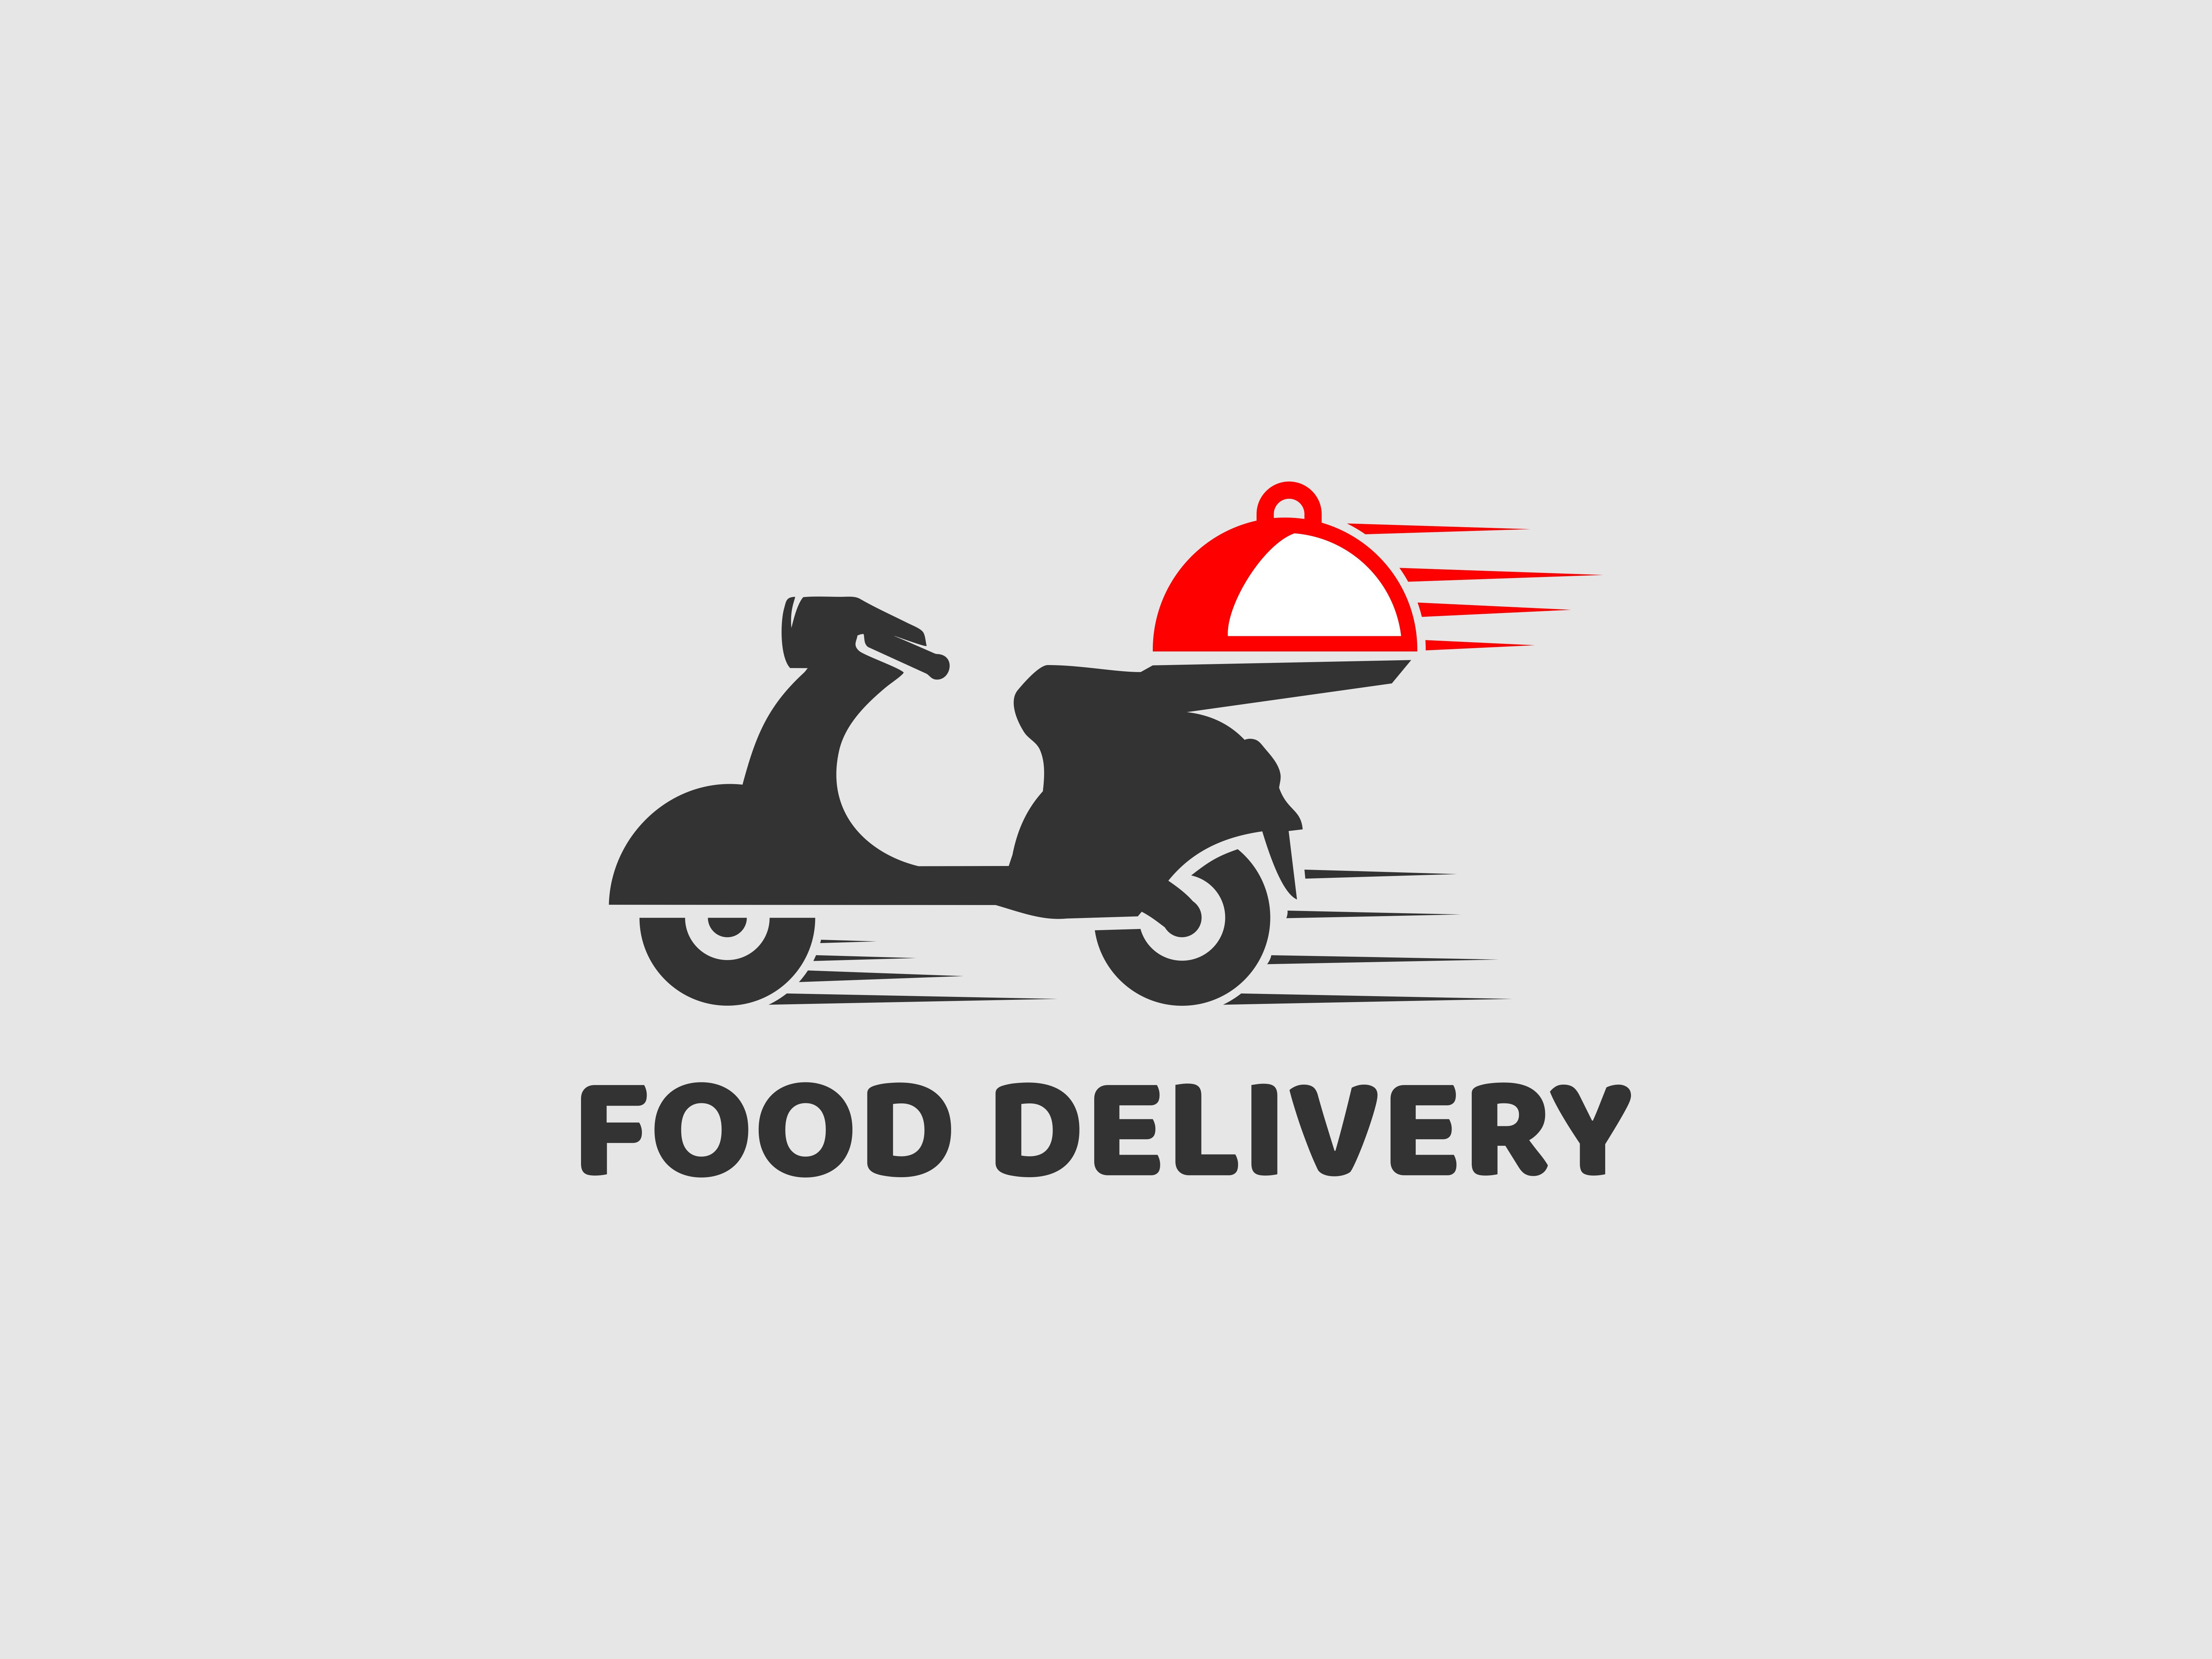 Free Food Delivery Services for Seniors - I Love Retirement